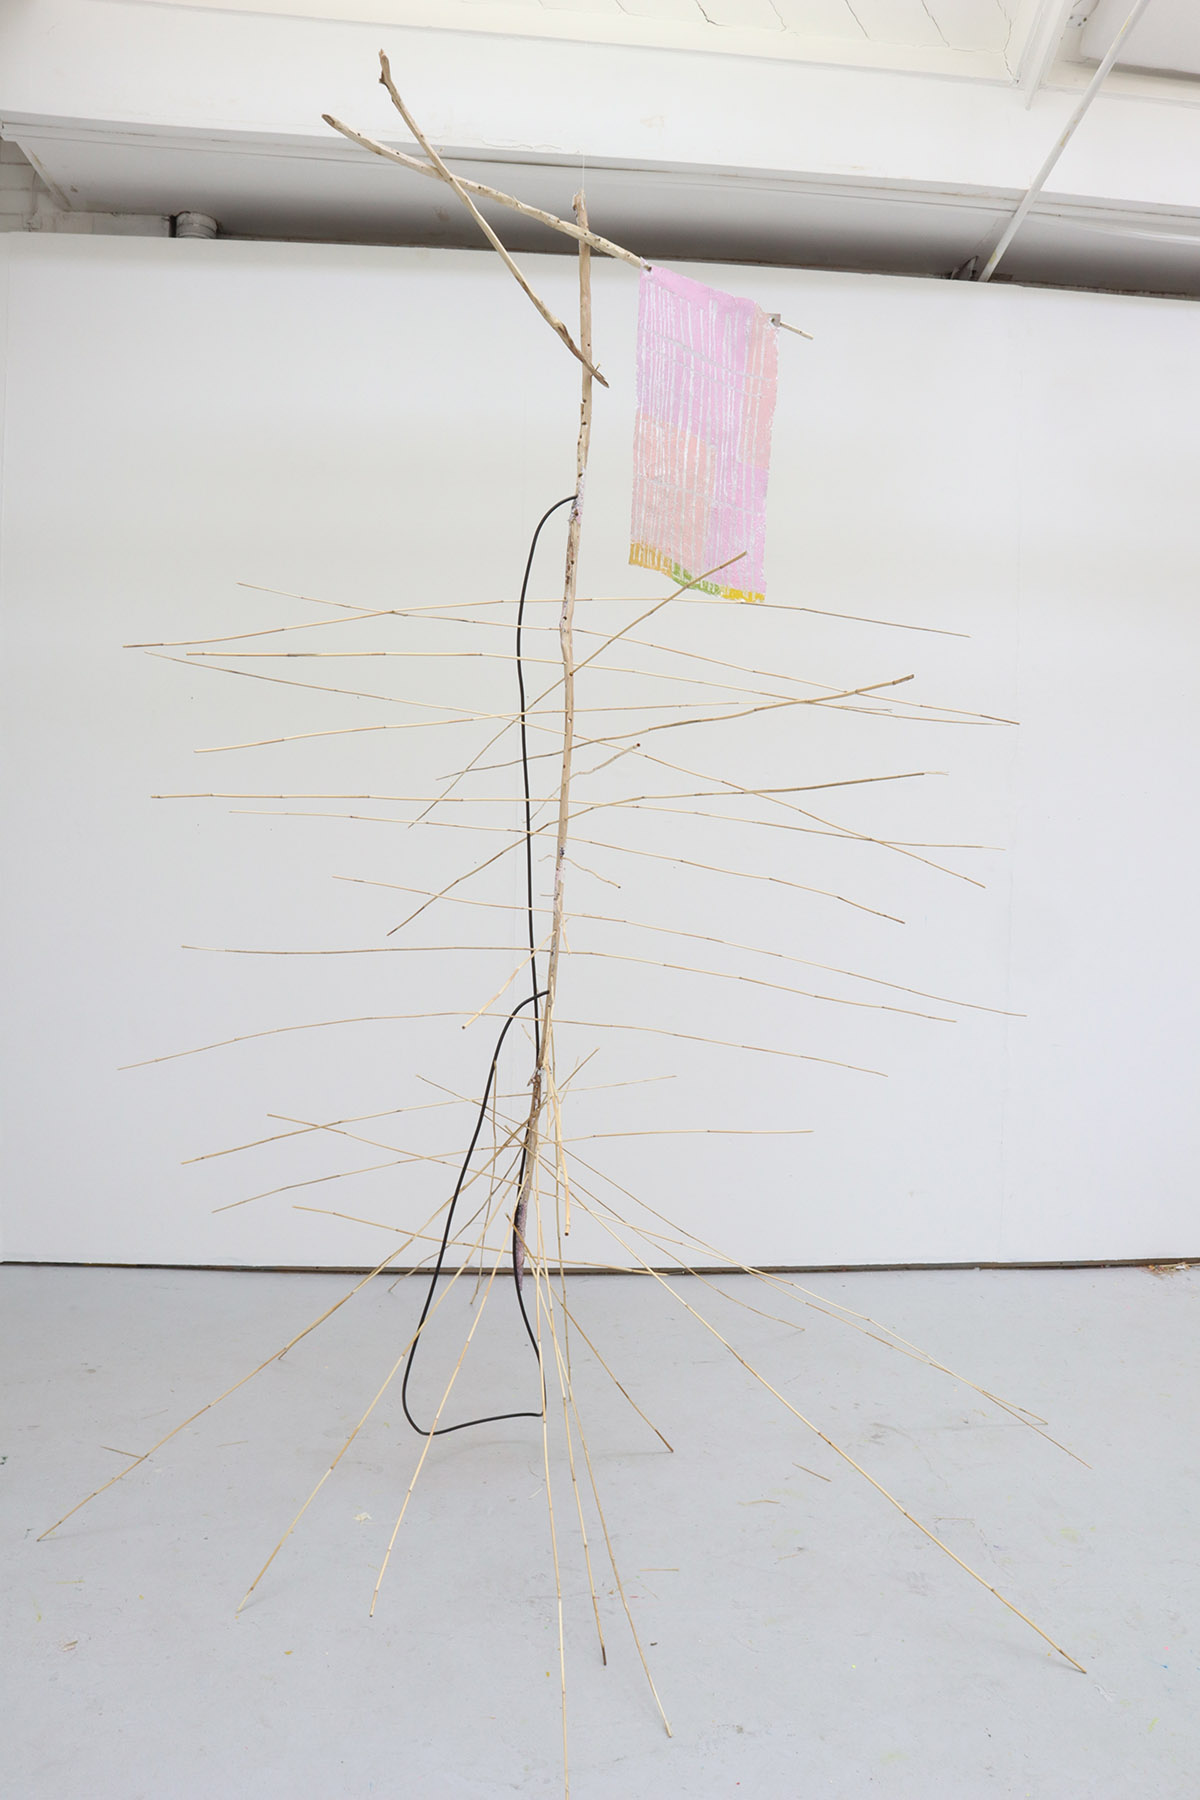 A freestanding sculpture made of thin sticks, from which hangs a pink oil pastel drawing with silver tape running through it.